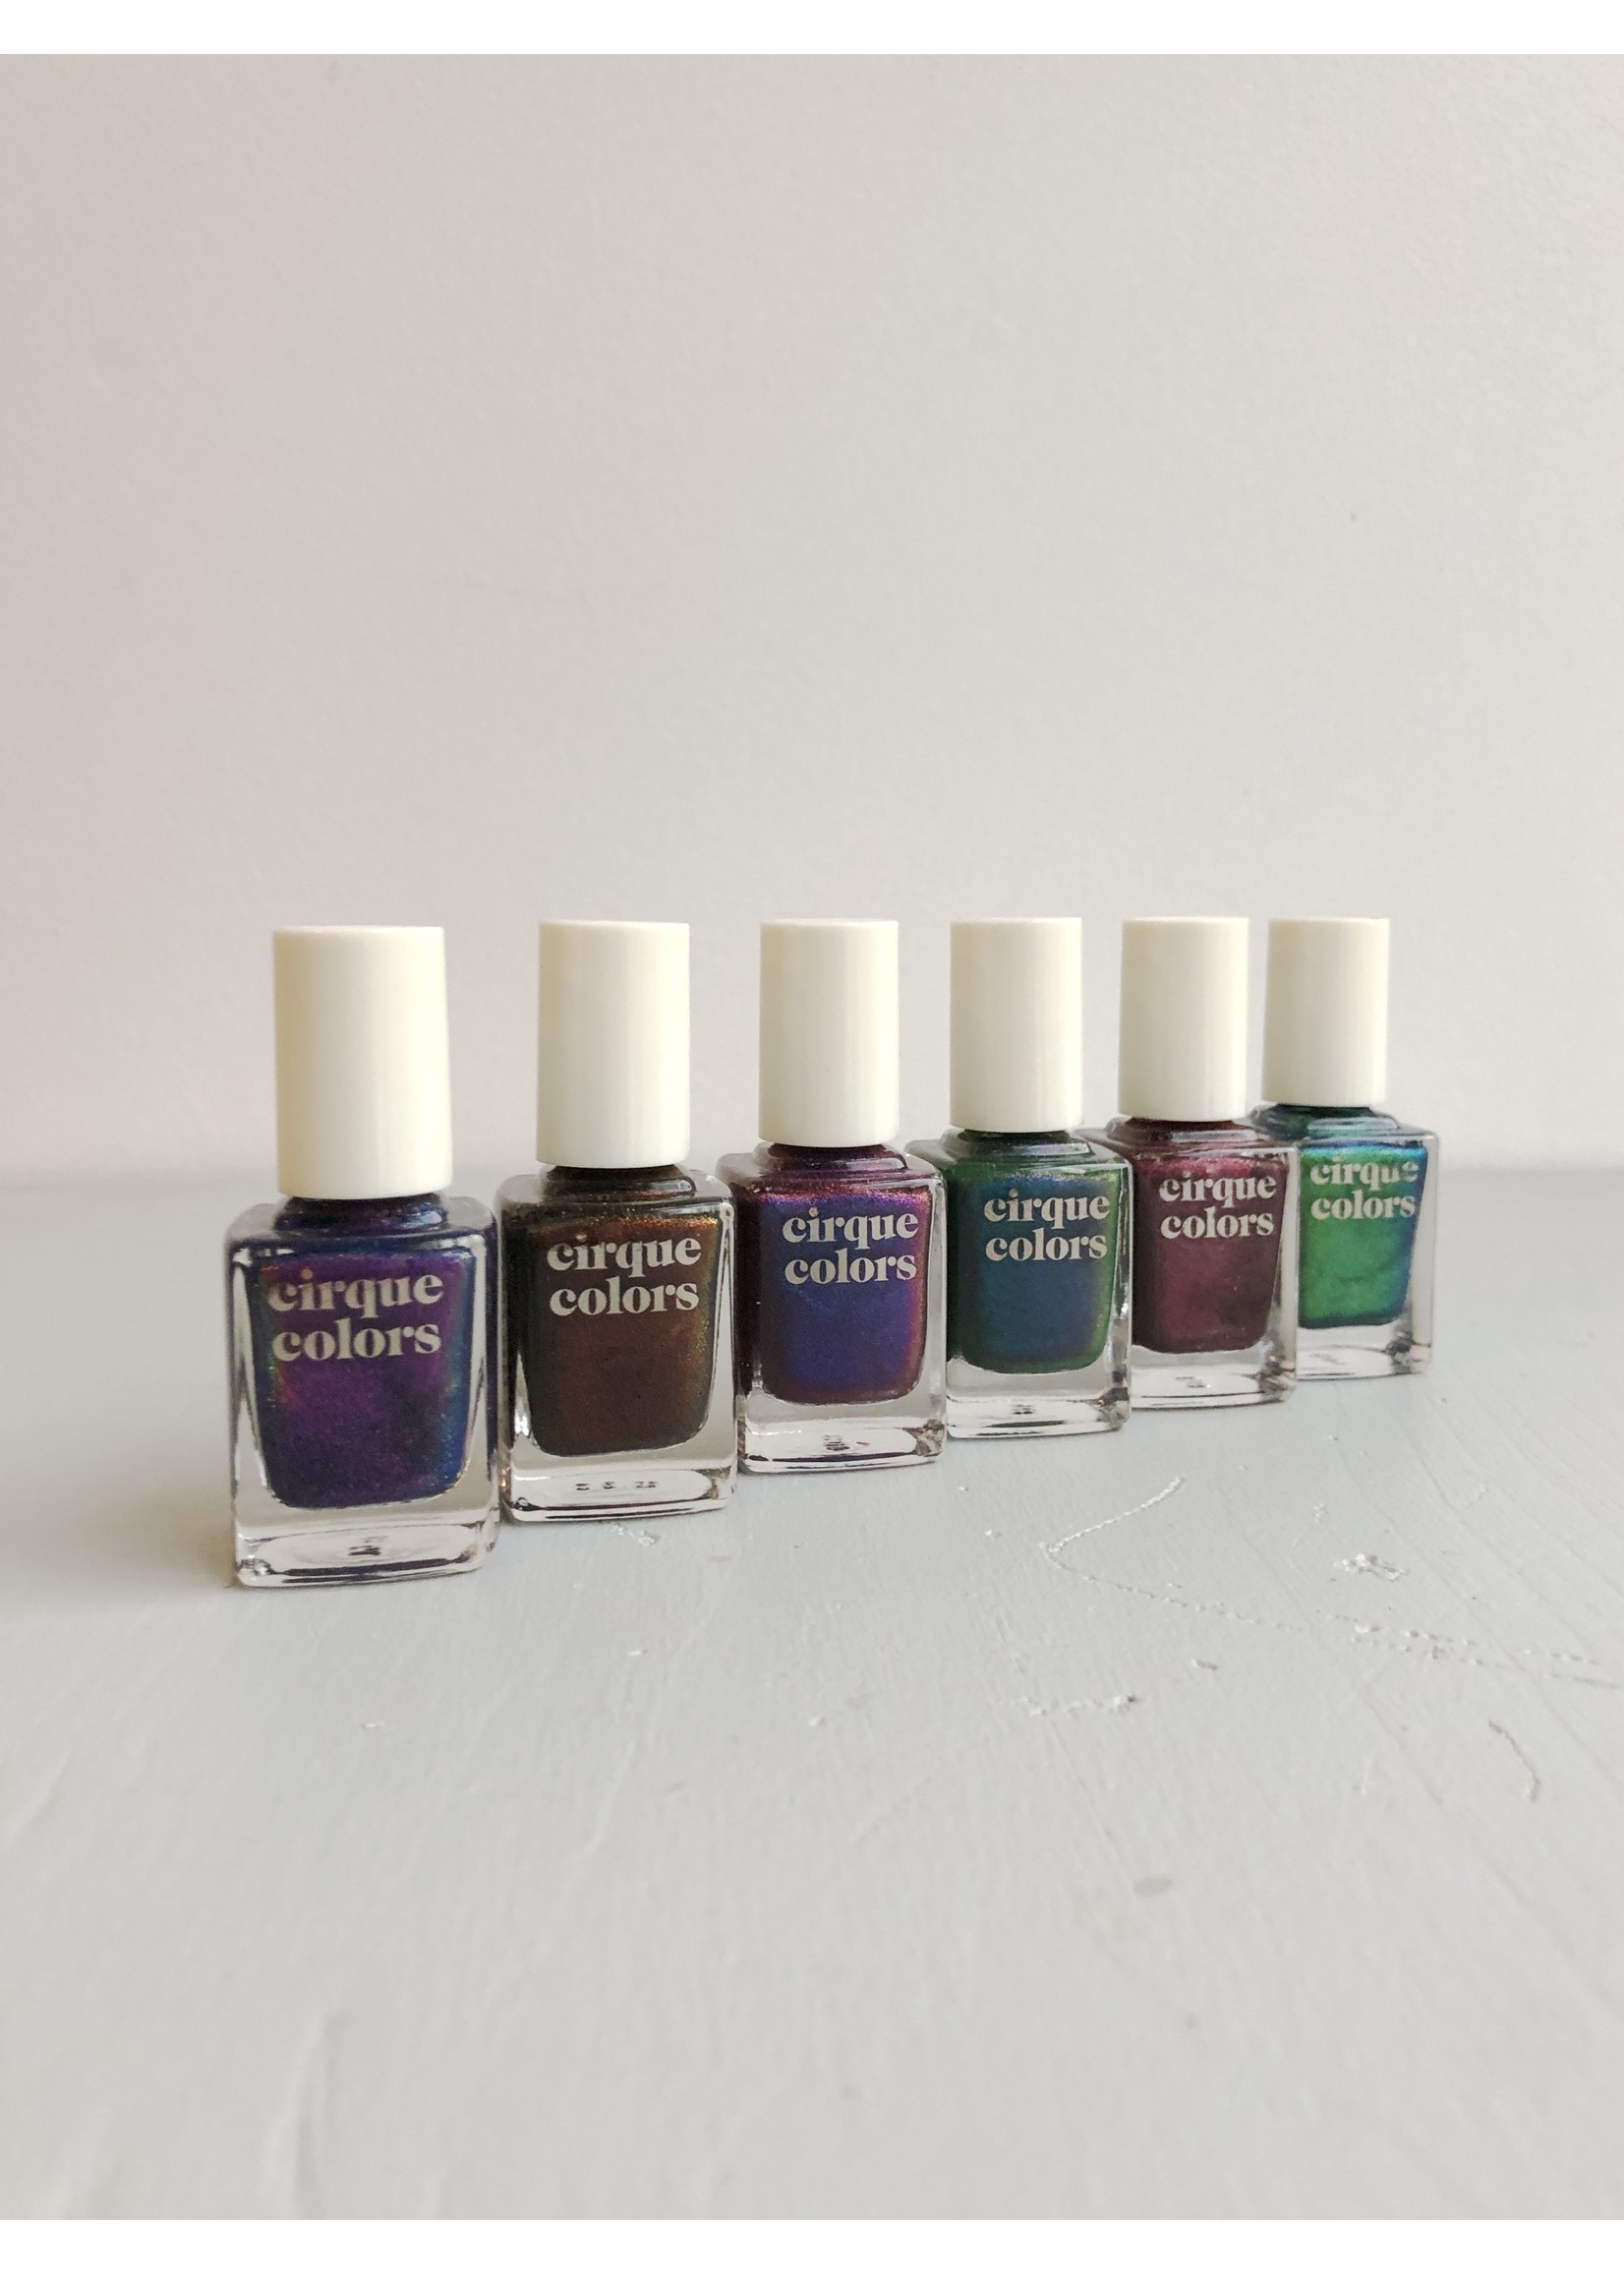 Cirque Colors Illusion Nail Polishes by Cirque Colors